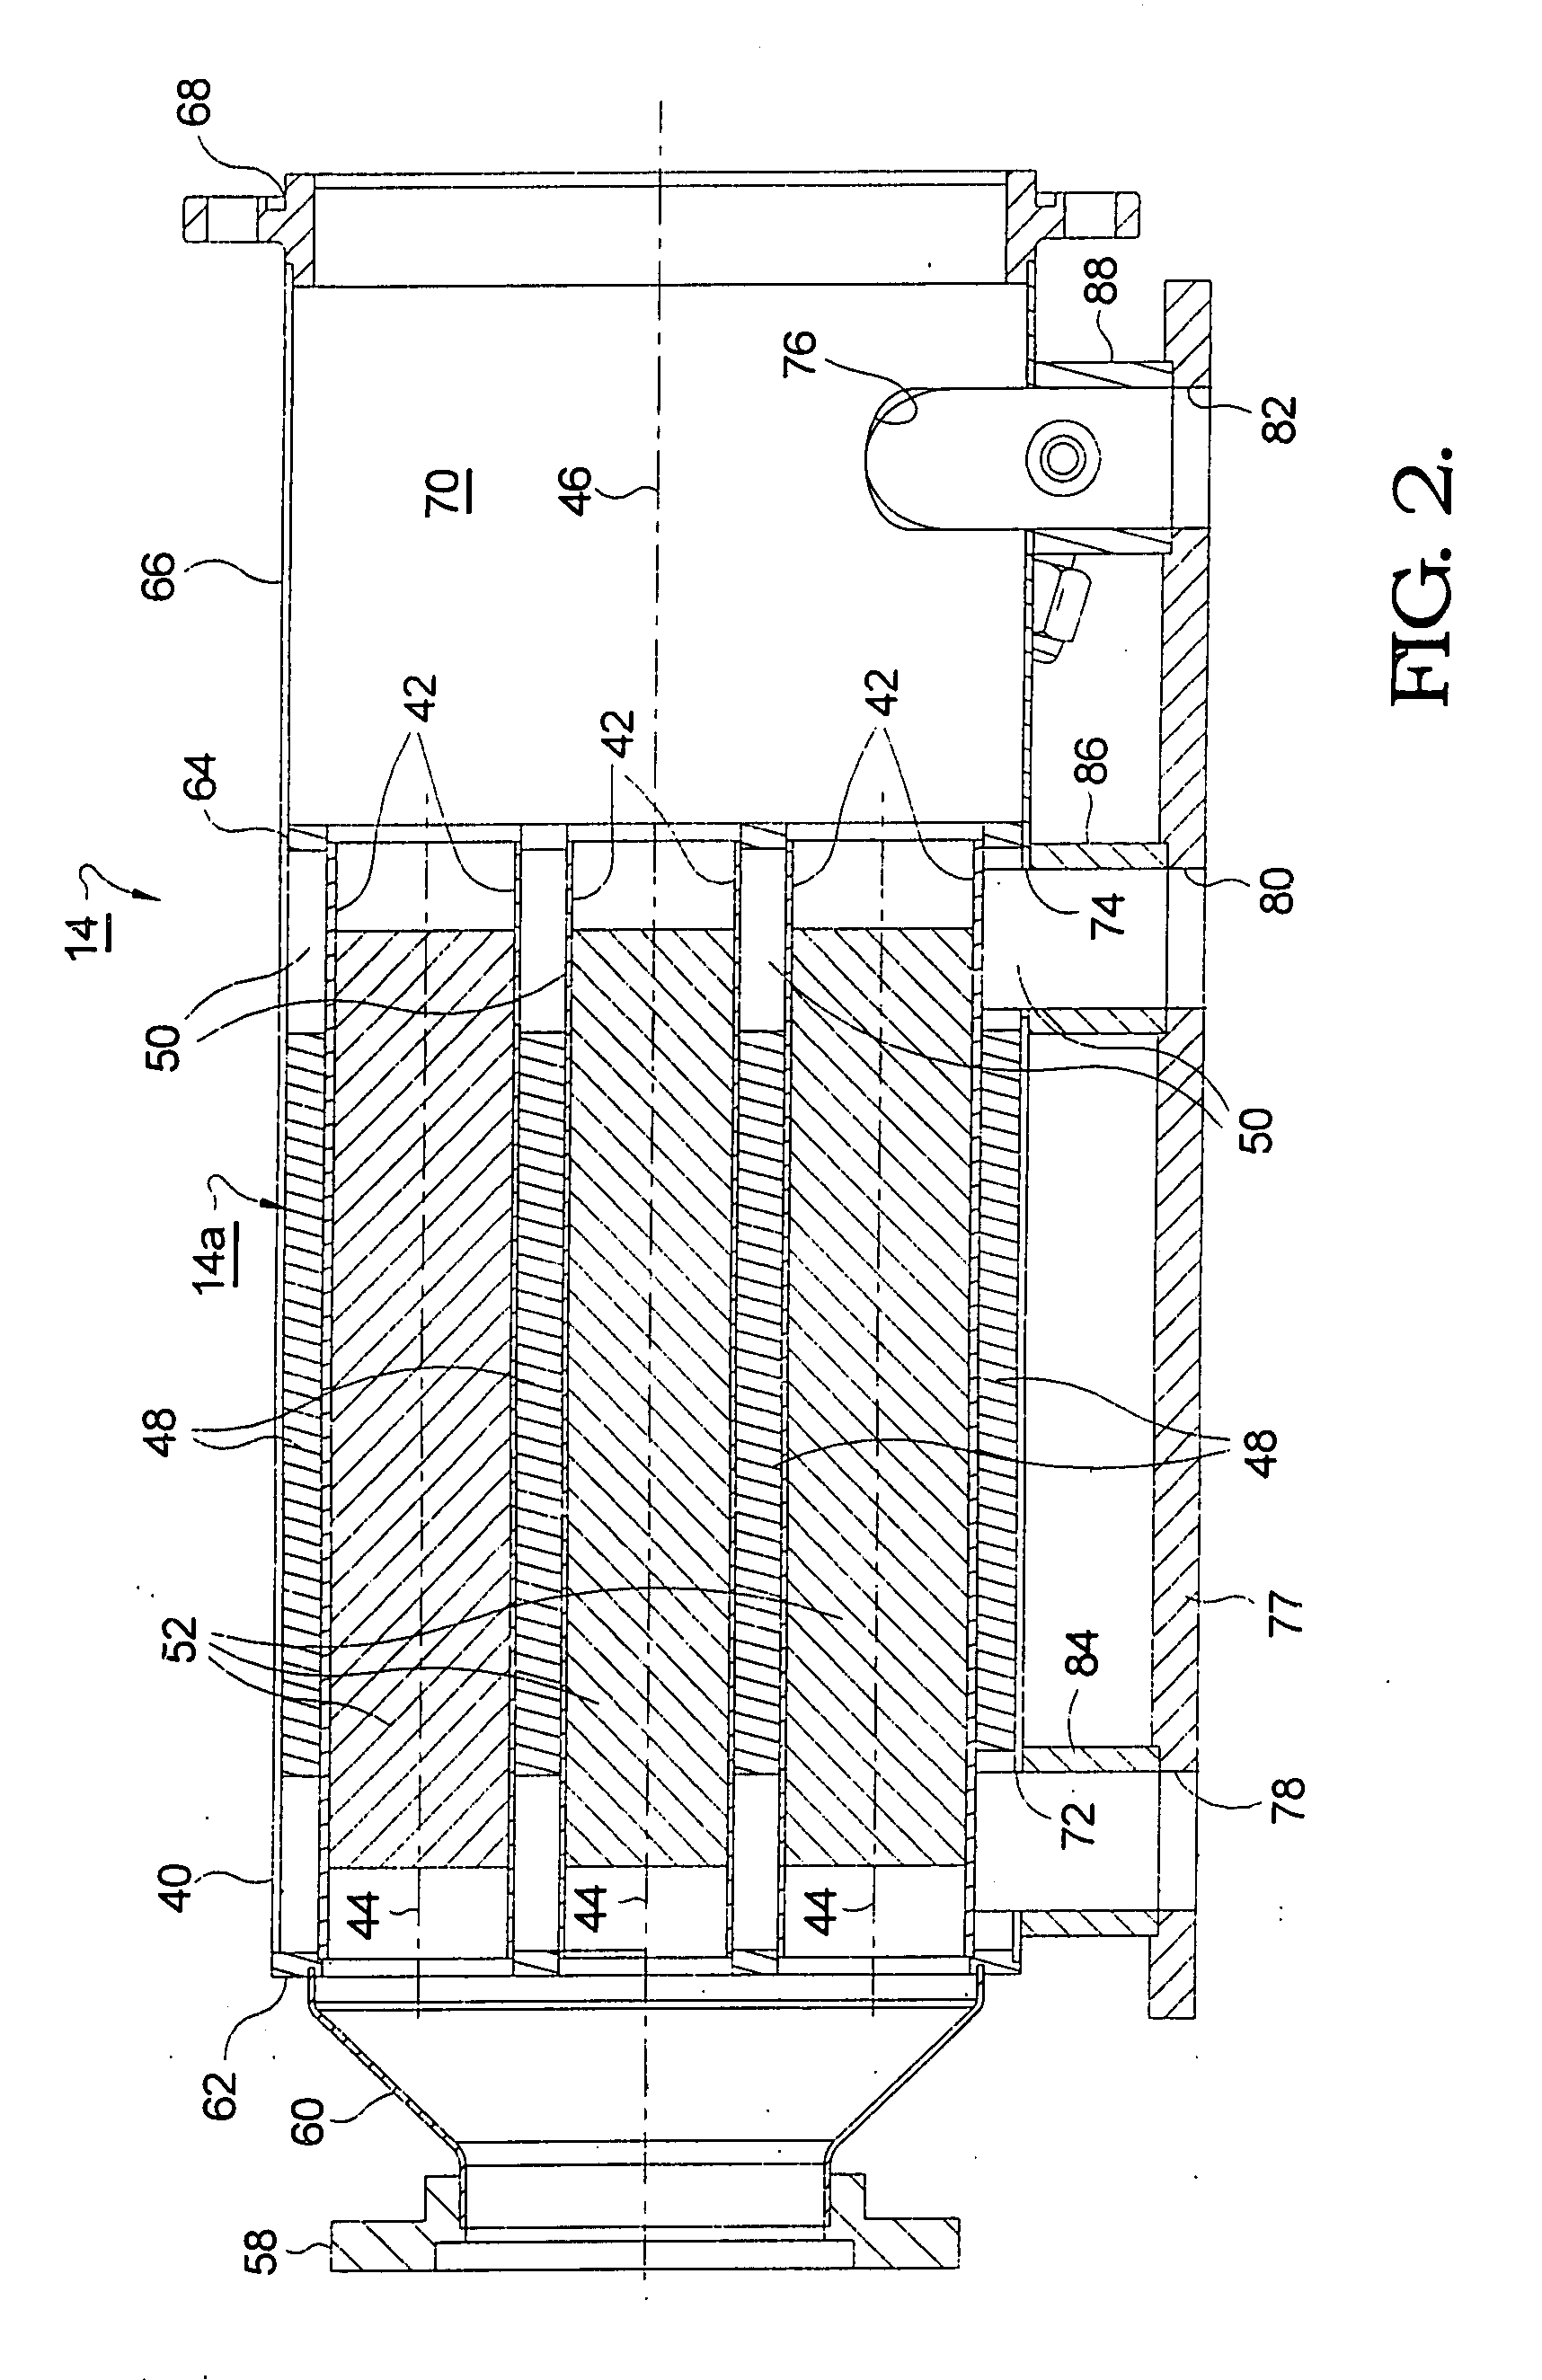 Multi-tube fuel reformer with augmented heat transfer